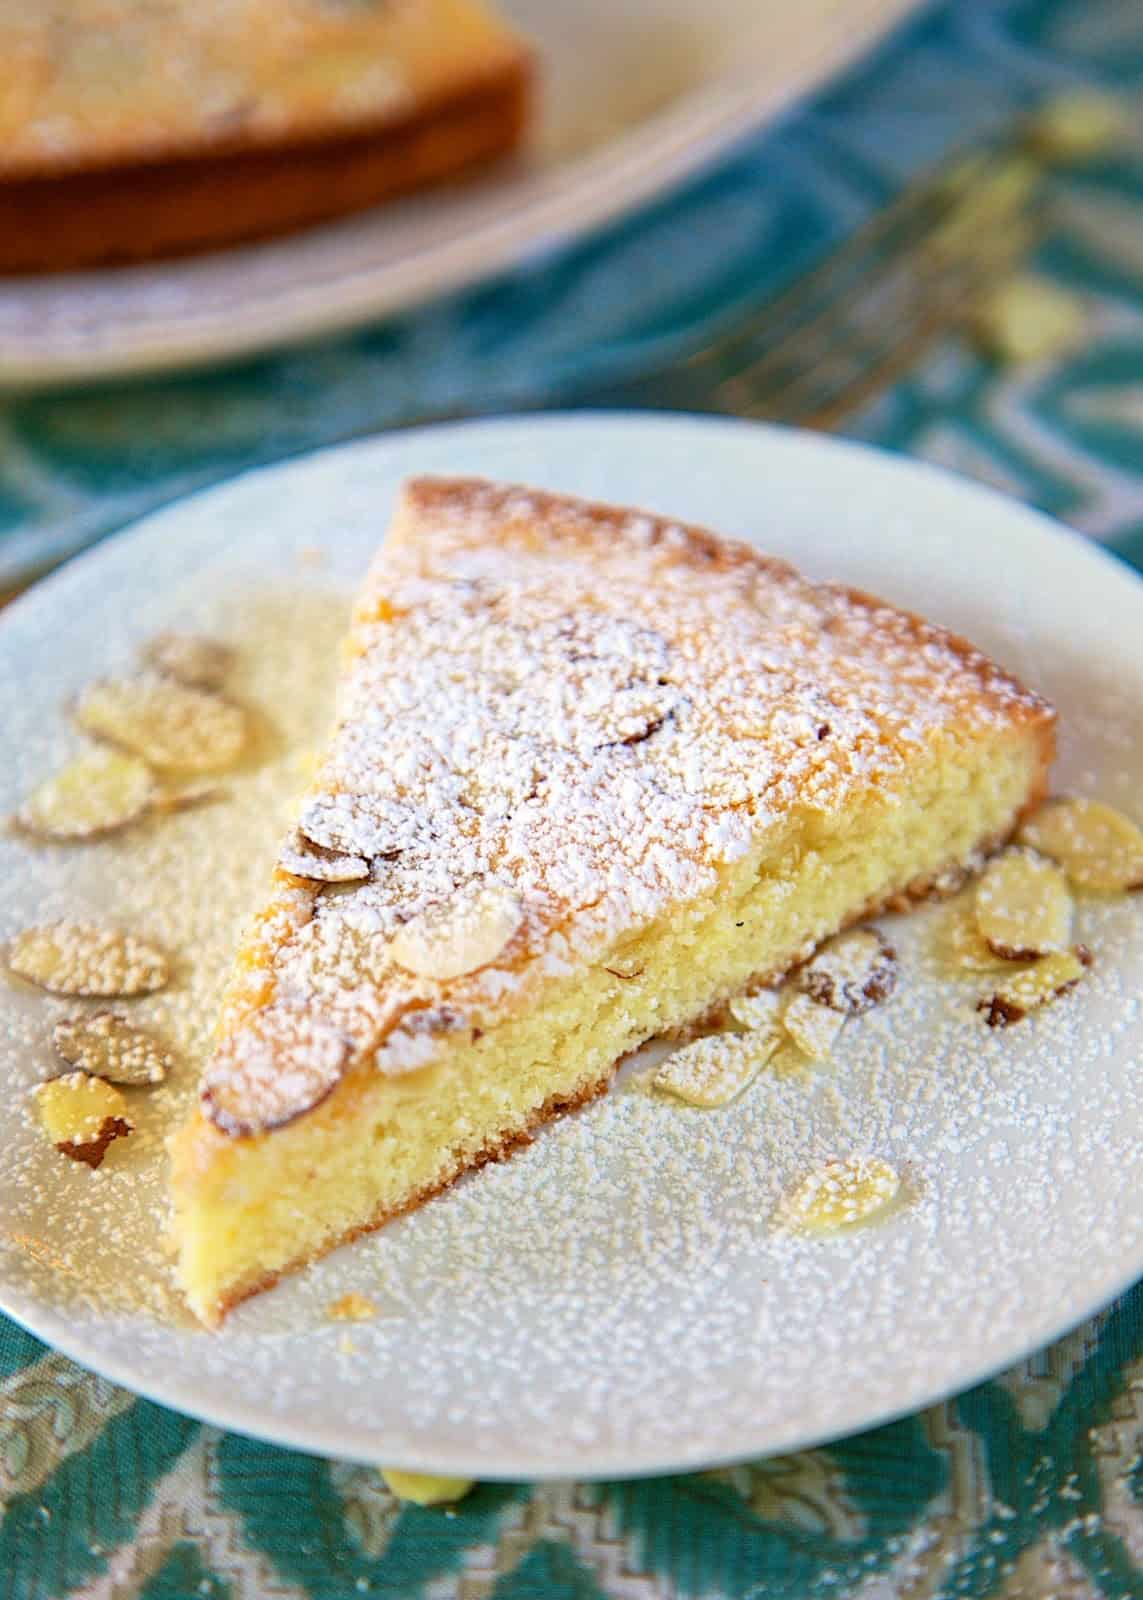 5-Minute Almond Cake Recipe - quick and delicious almond cake - only takes 5 minutes to make! It was ready before the oven preheated!! Great with a nice cup of coffee.